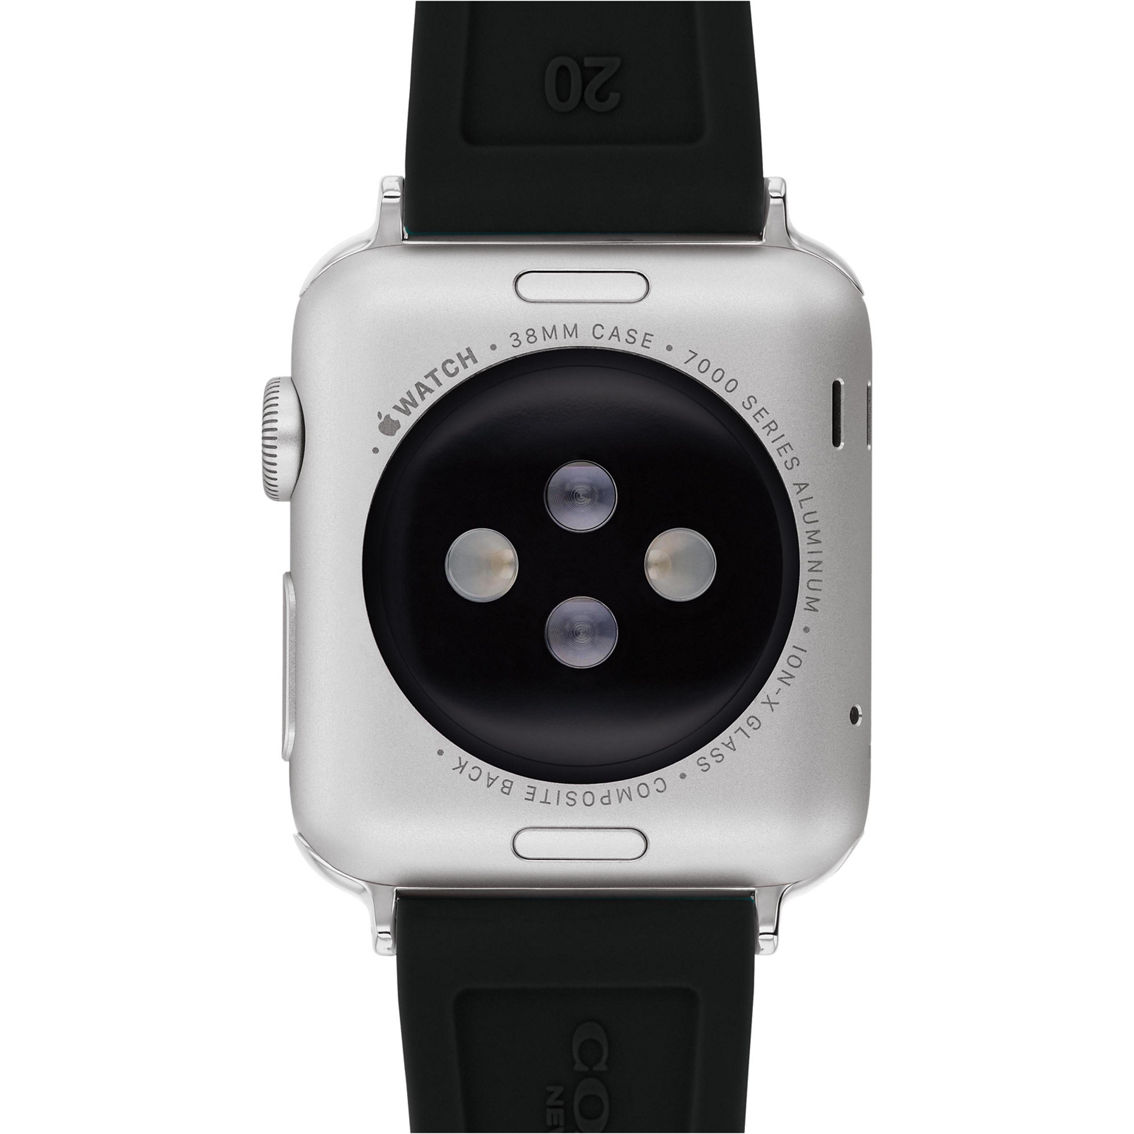 Coach Women's Apple Watch Black Silicone Strap - Image 3 of 4